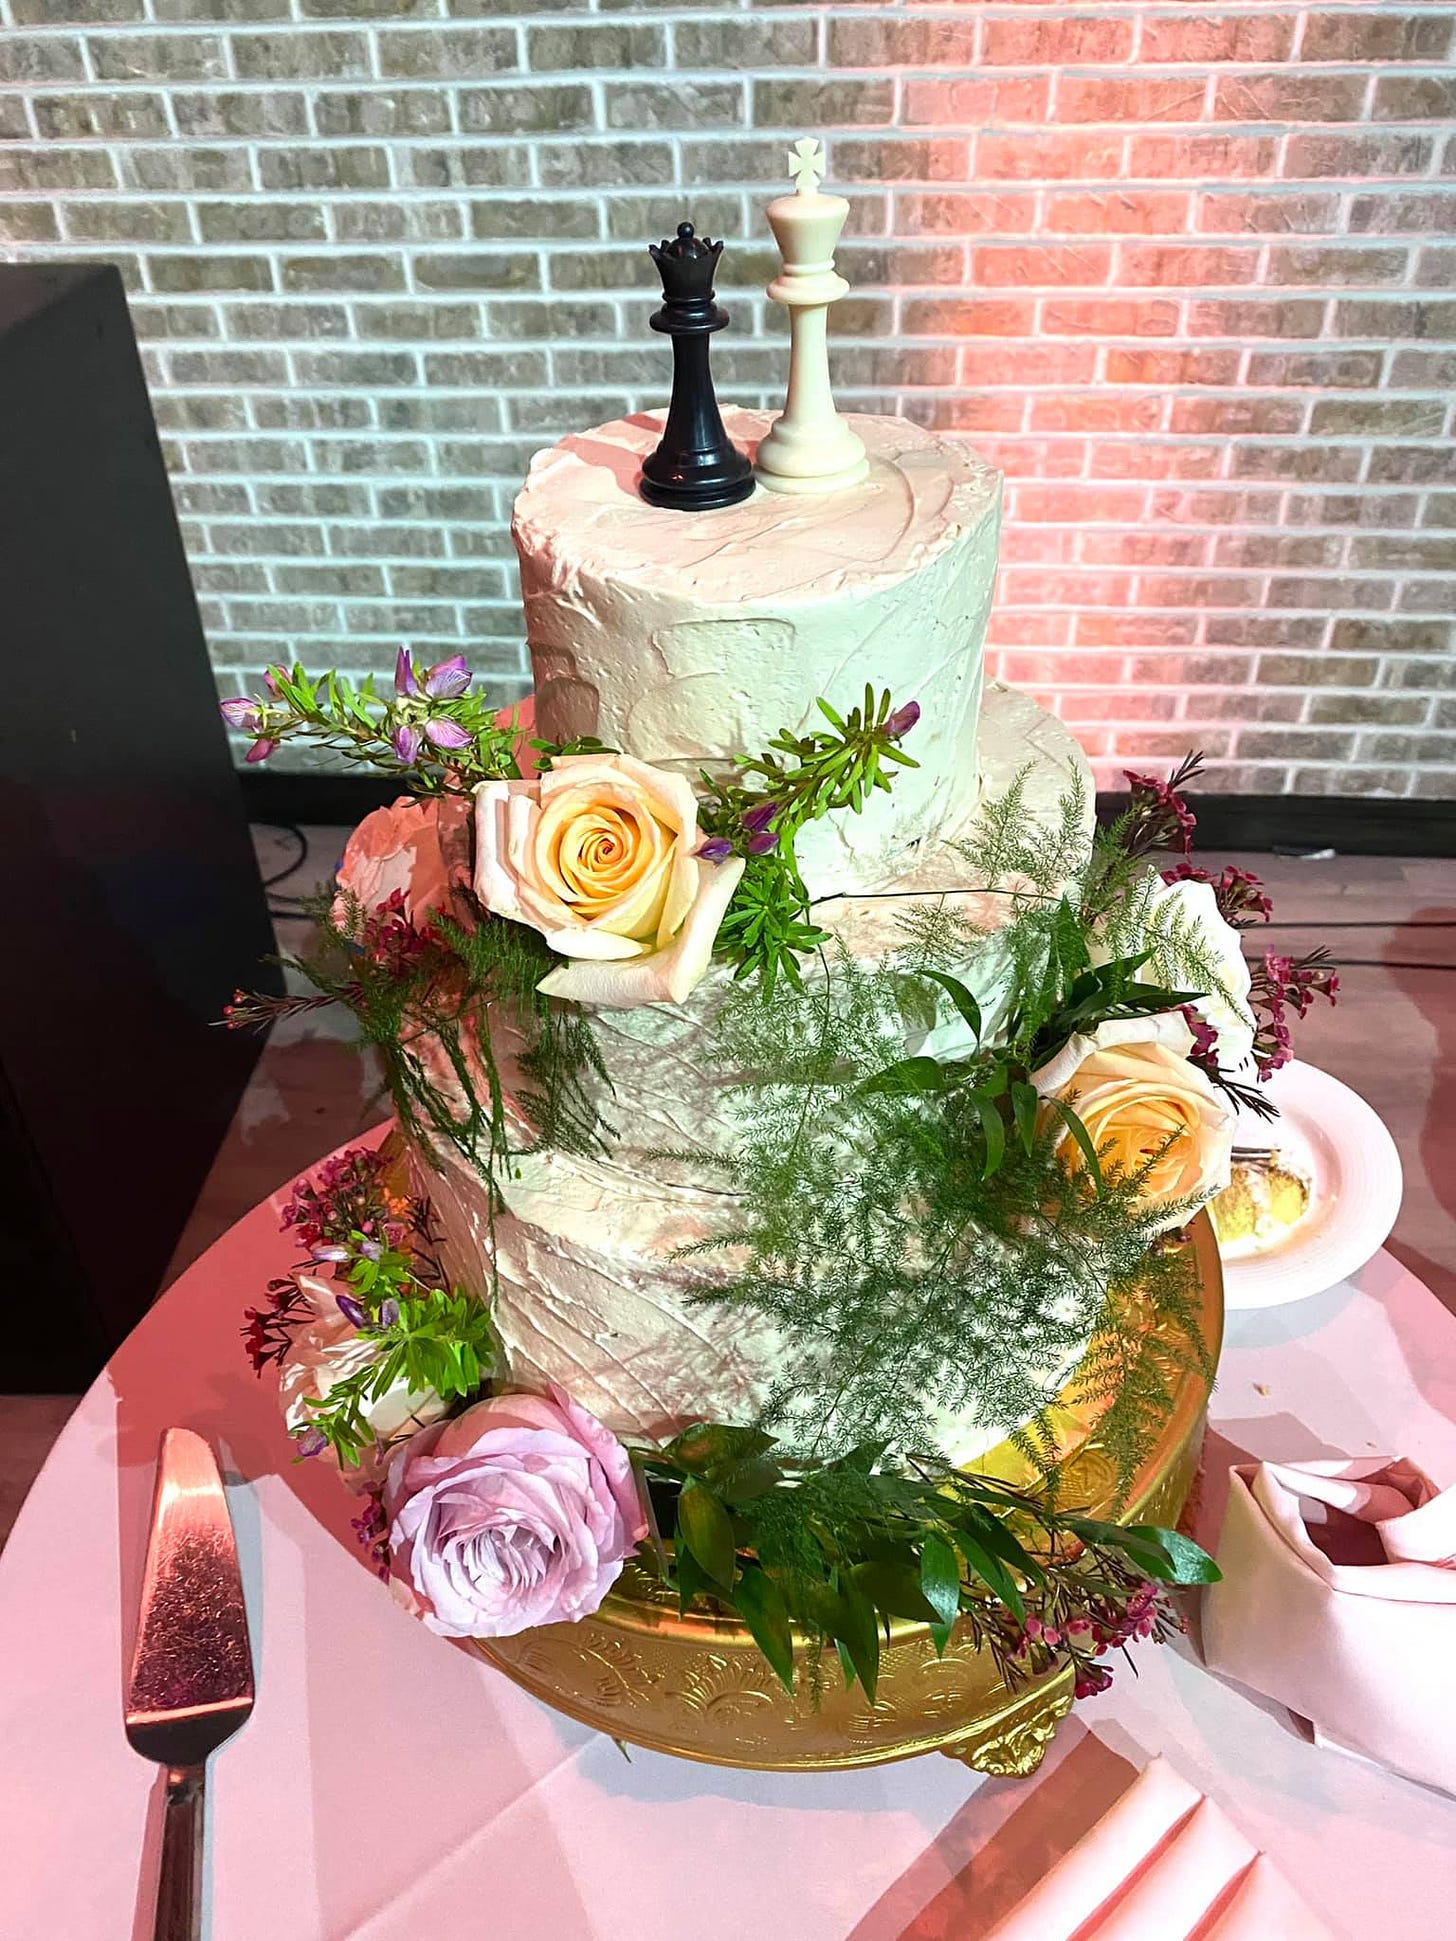 May be an image of cake and flower